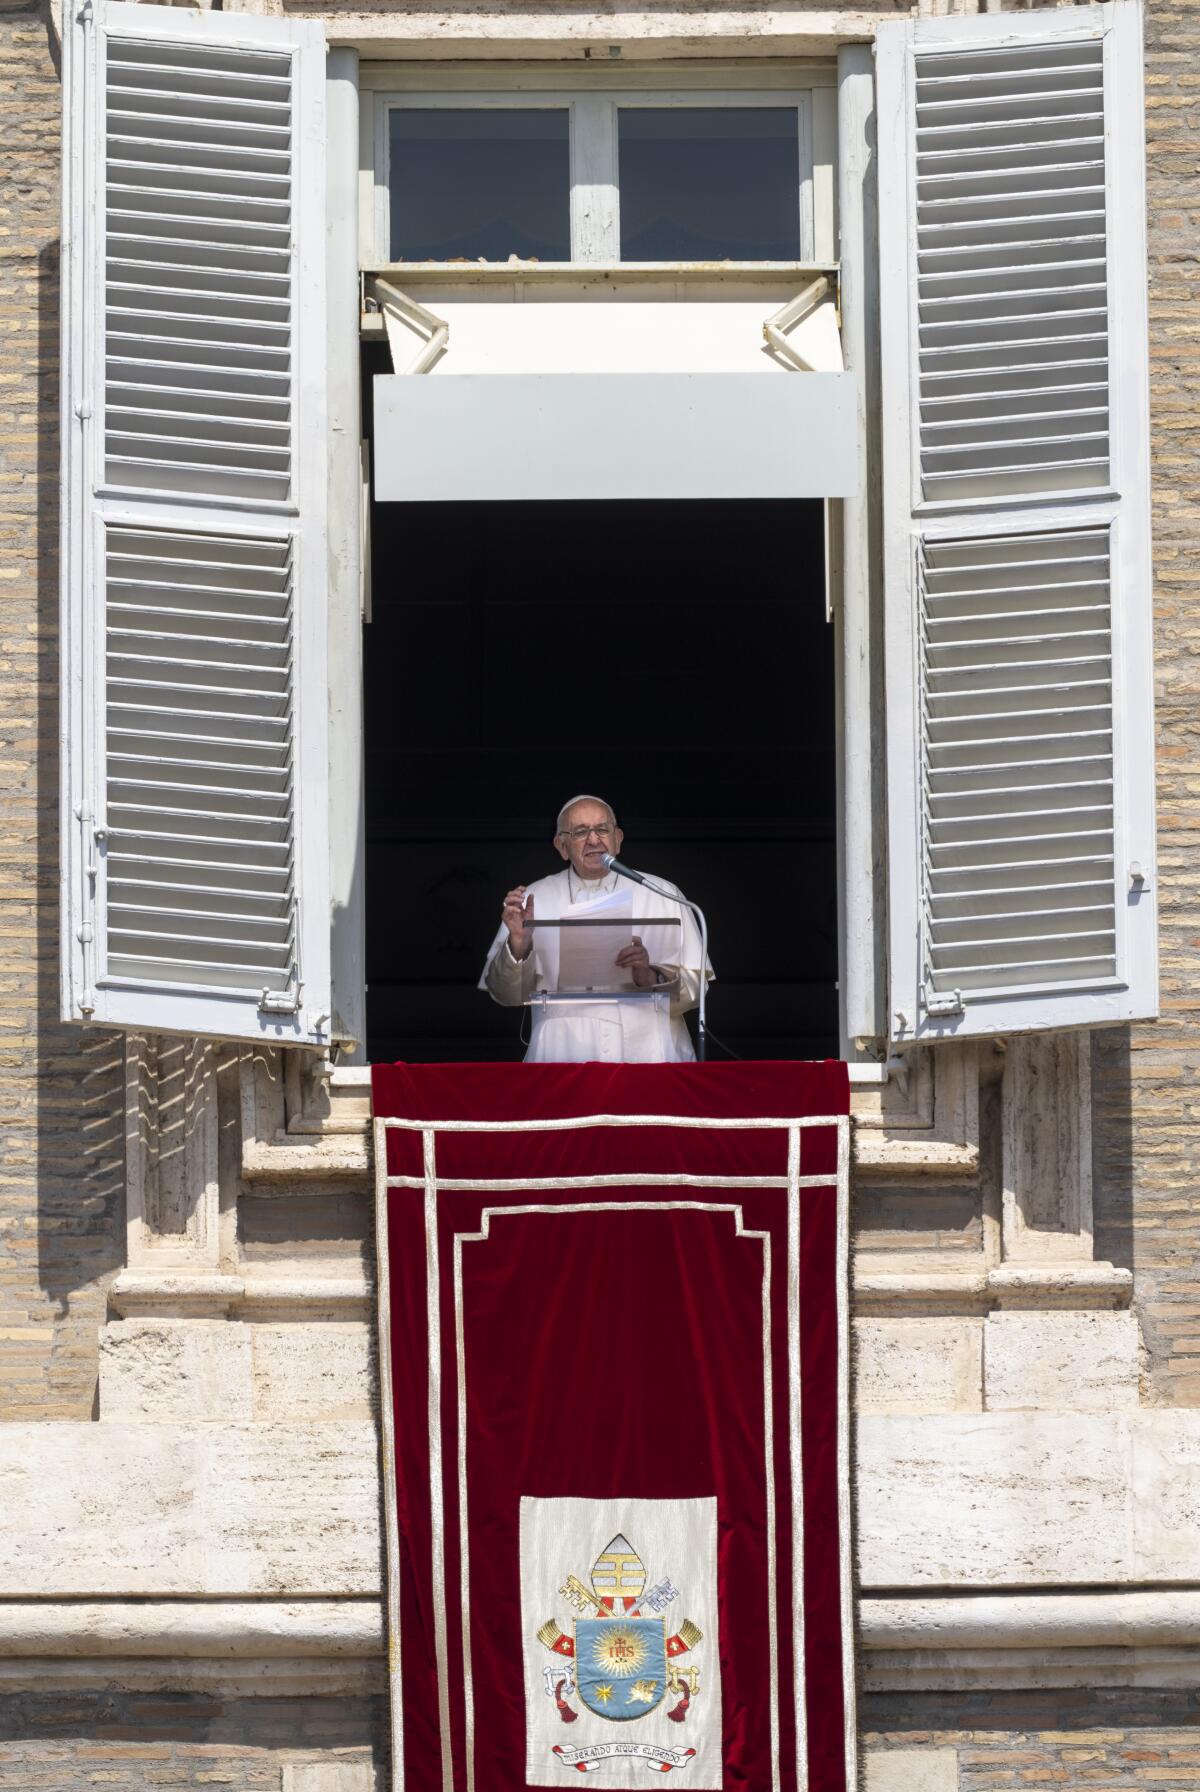 Pope Francis addresses the faithful gathered in St. Peter's Square at The Vatican, Sunday, Aug. 21, 2022, during his traditional Sunday's noon appearance. (AP Photo/Domenico Stinellis)